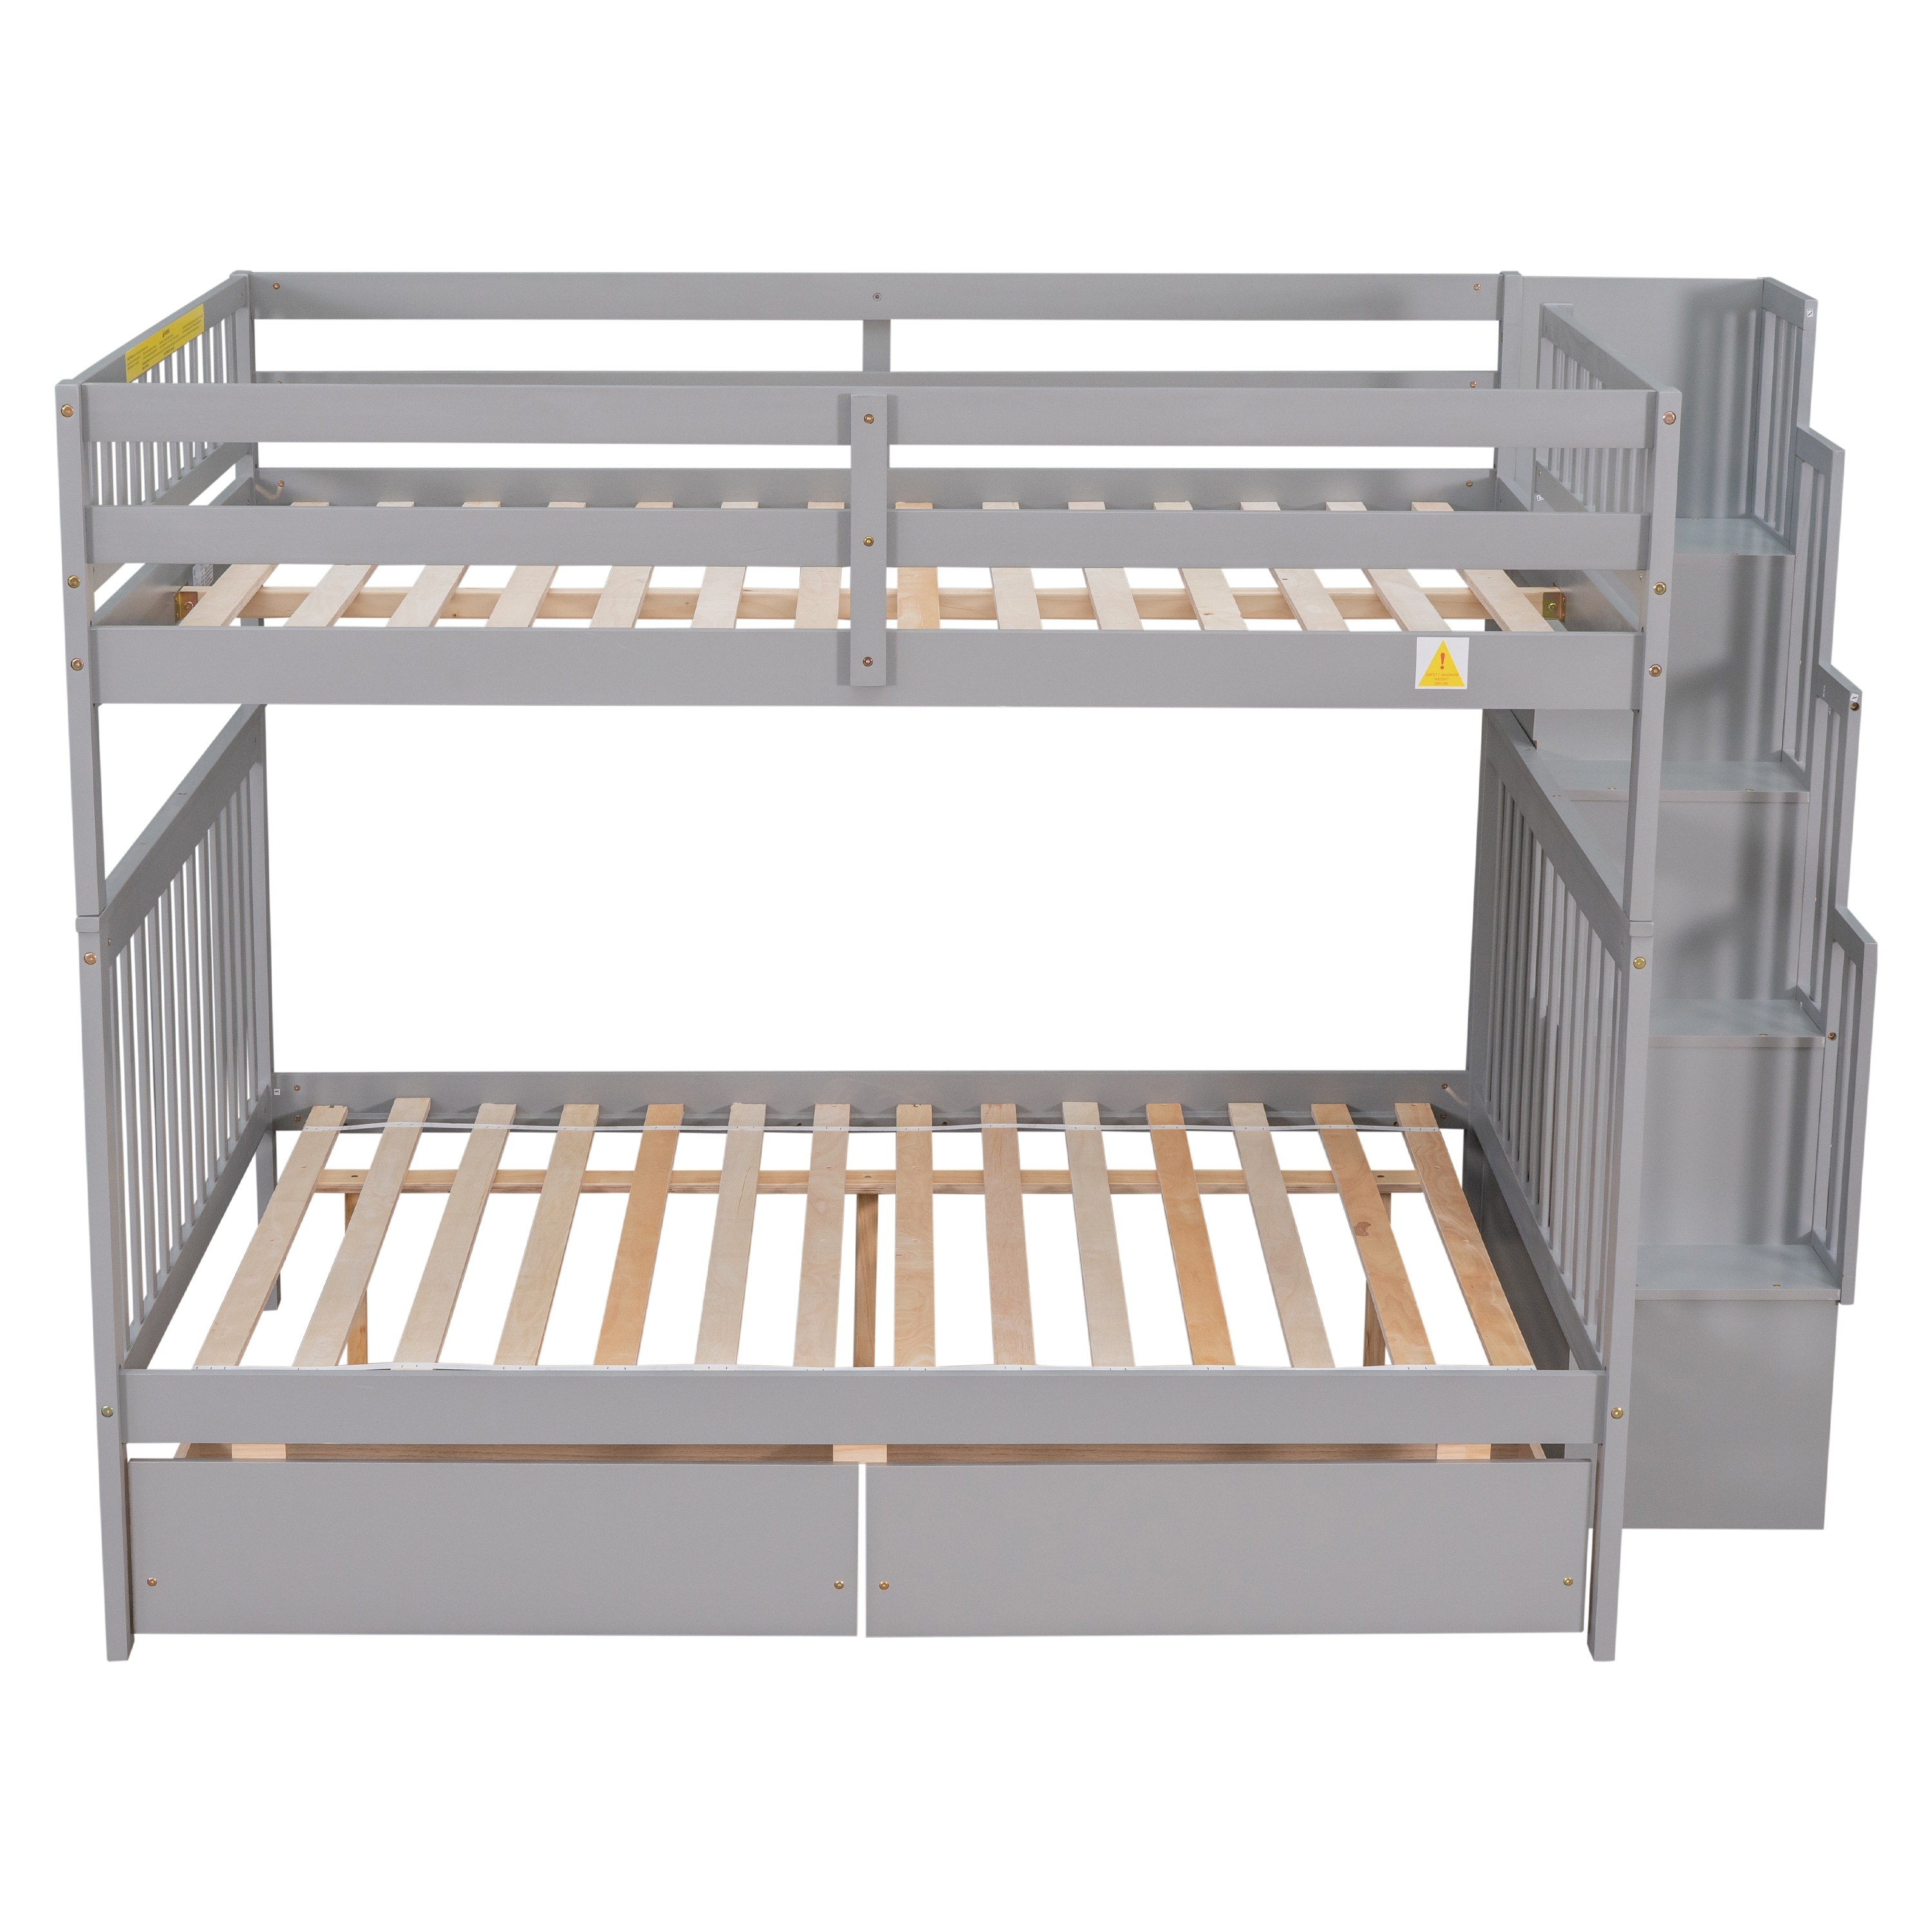 Full Over Full Bunk Bed with 2 Drawers, Staircases, and Convertible Option, Pine Bed with Staircase Storage and Safety Rails